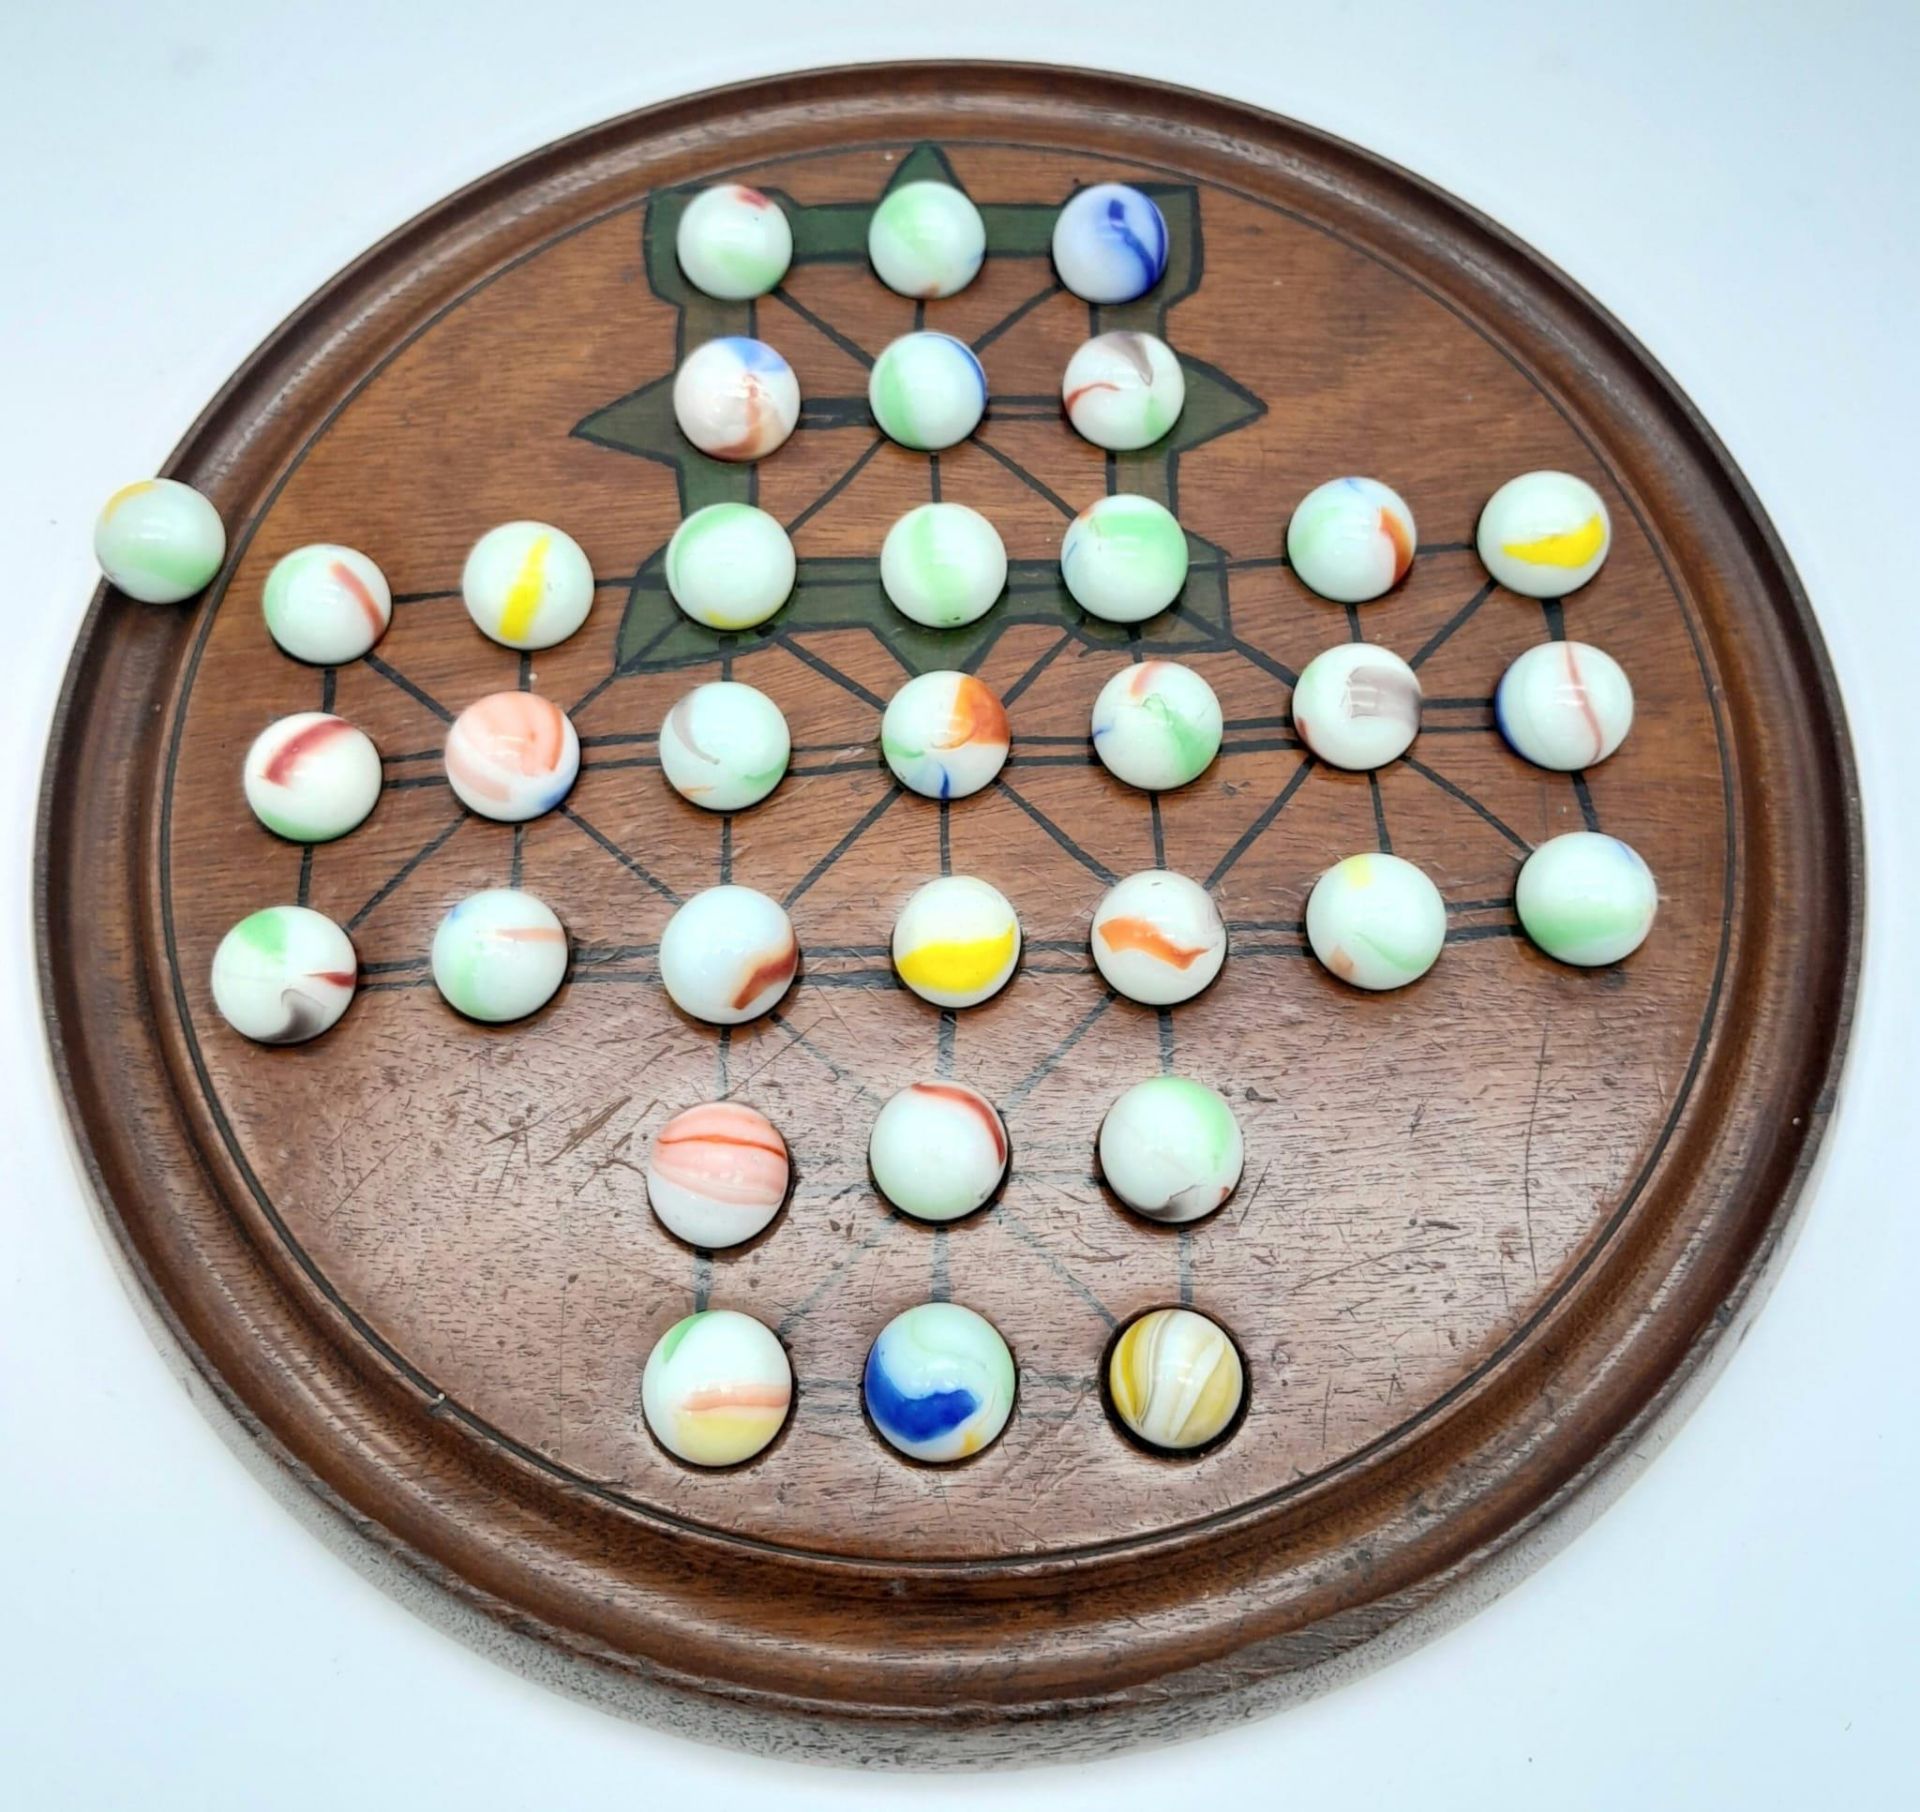 A Scarce Antique Victorian or Edwardian Hardwood and Marbles Solitaire Board. 23cm Diameter. Full